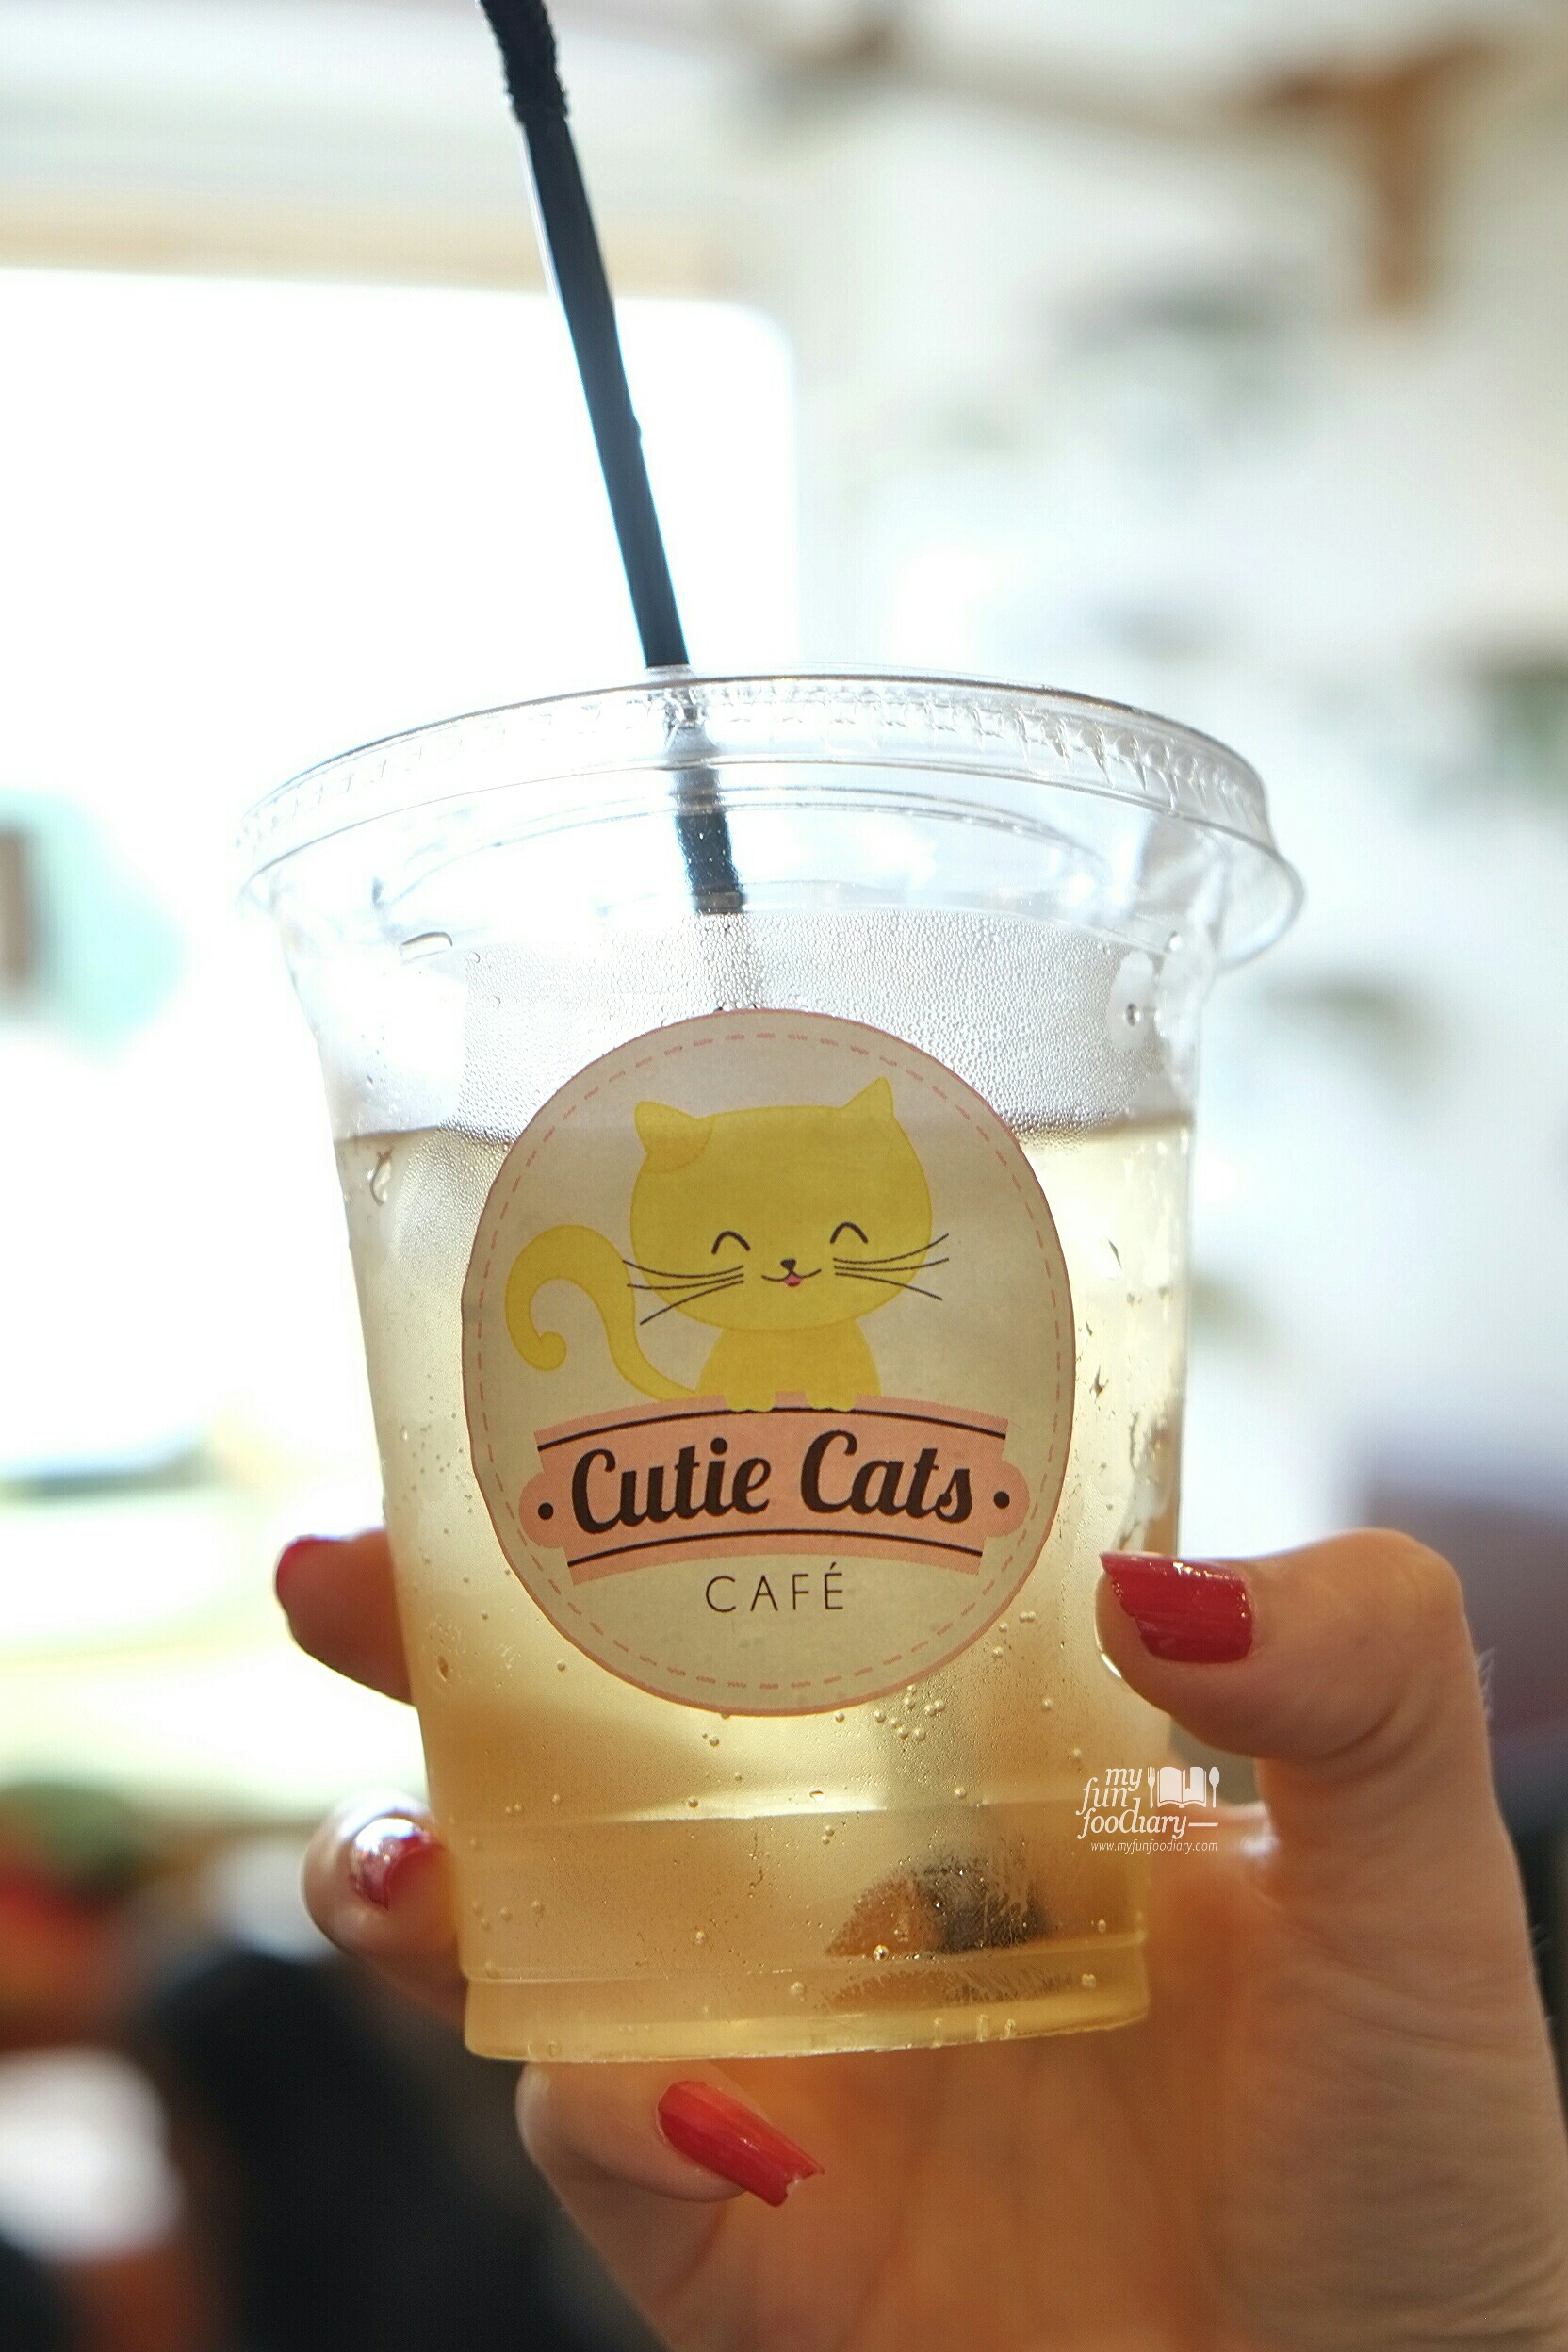 Apple Sparkler at Cutie Cats Cafe by Myfunfoodiary